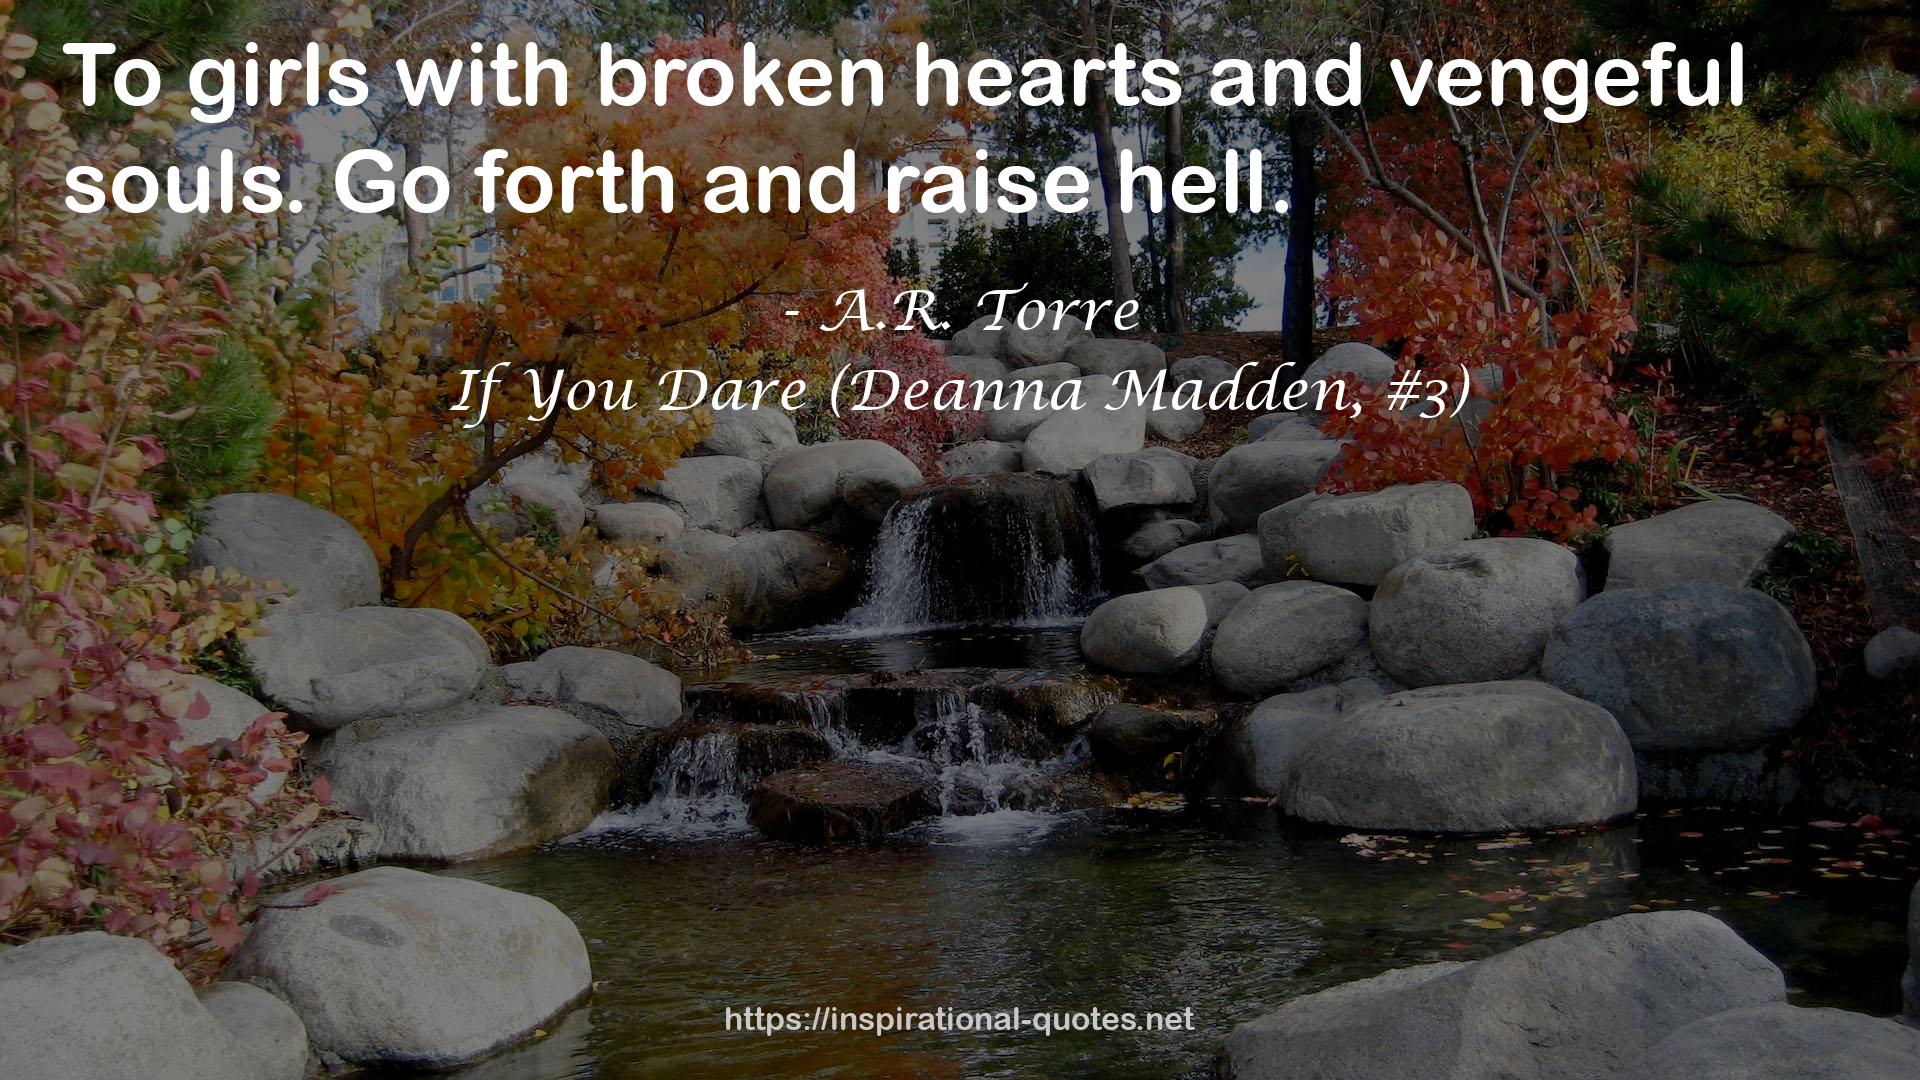 If You Dare (Deanna Madden, #3) QUOTES